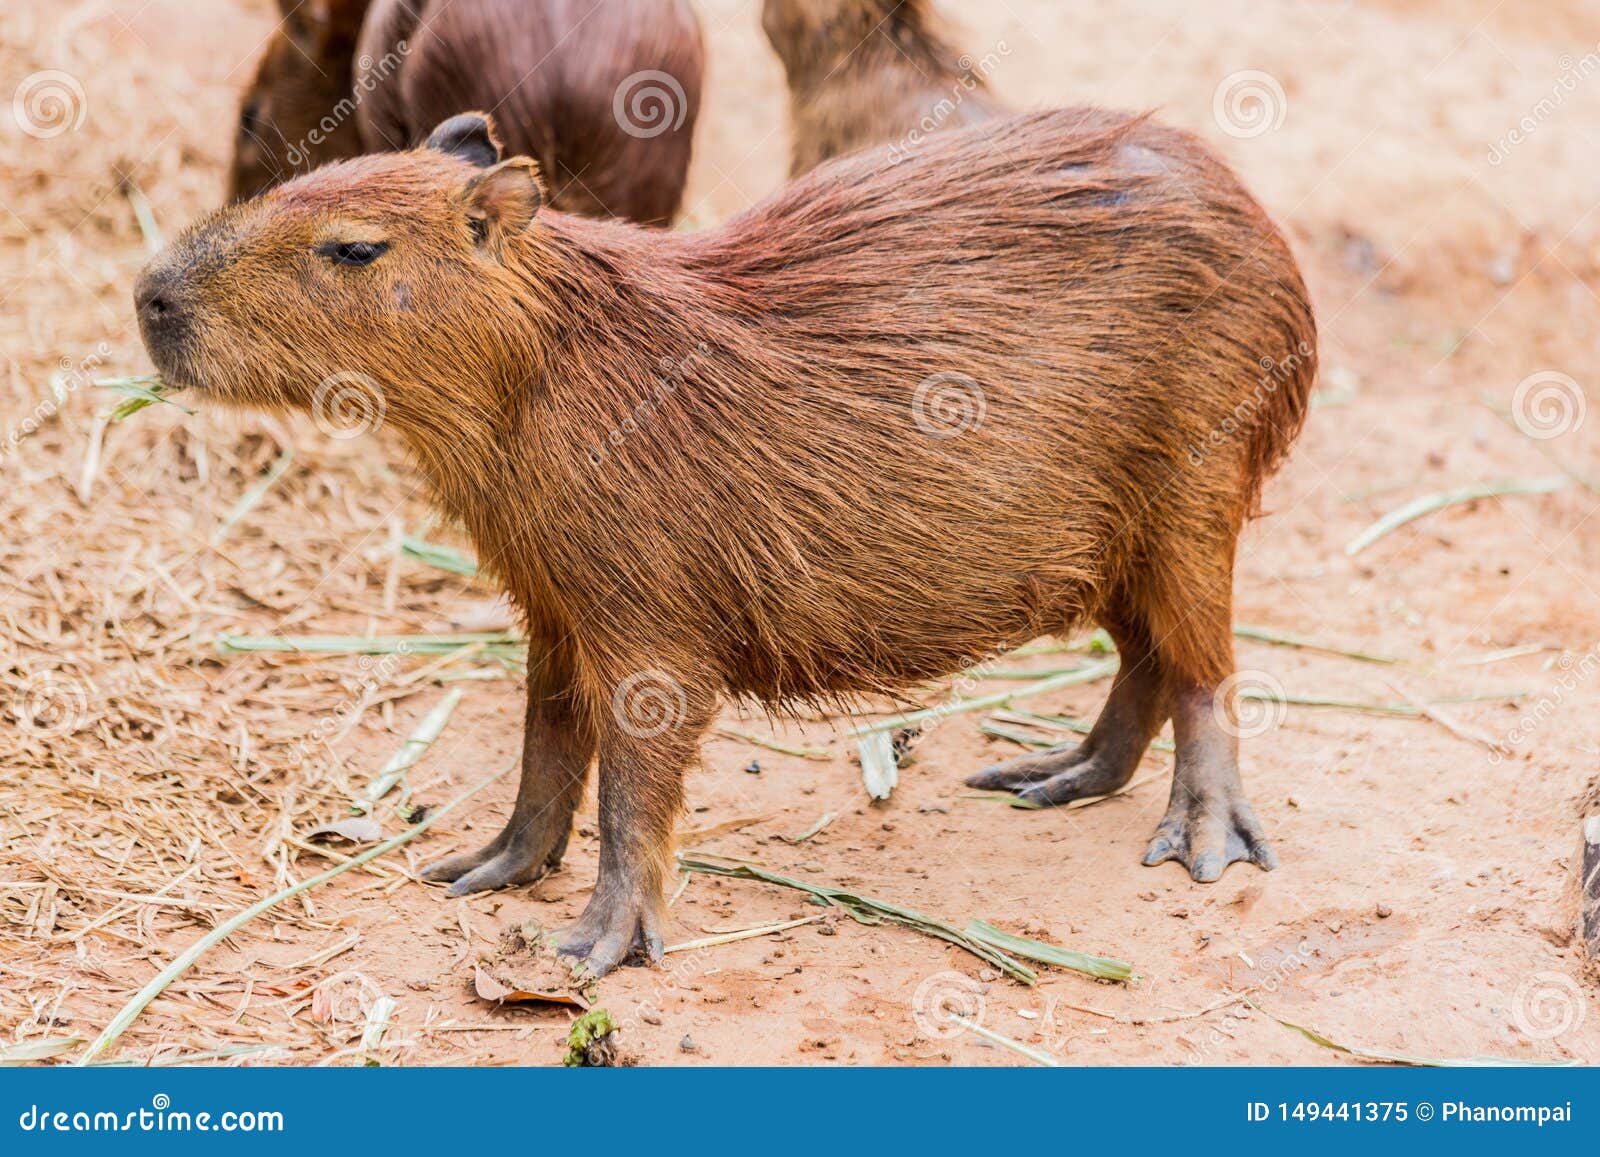 South American Capybara or Hydrochaeris is the Largest Rodent in the World  Stock Image - Image of brown, outdoors: 149441375